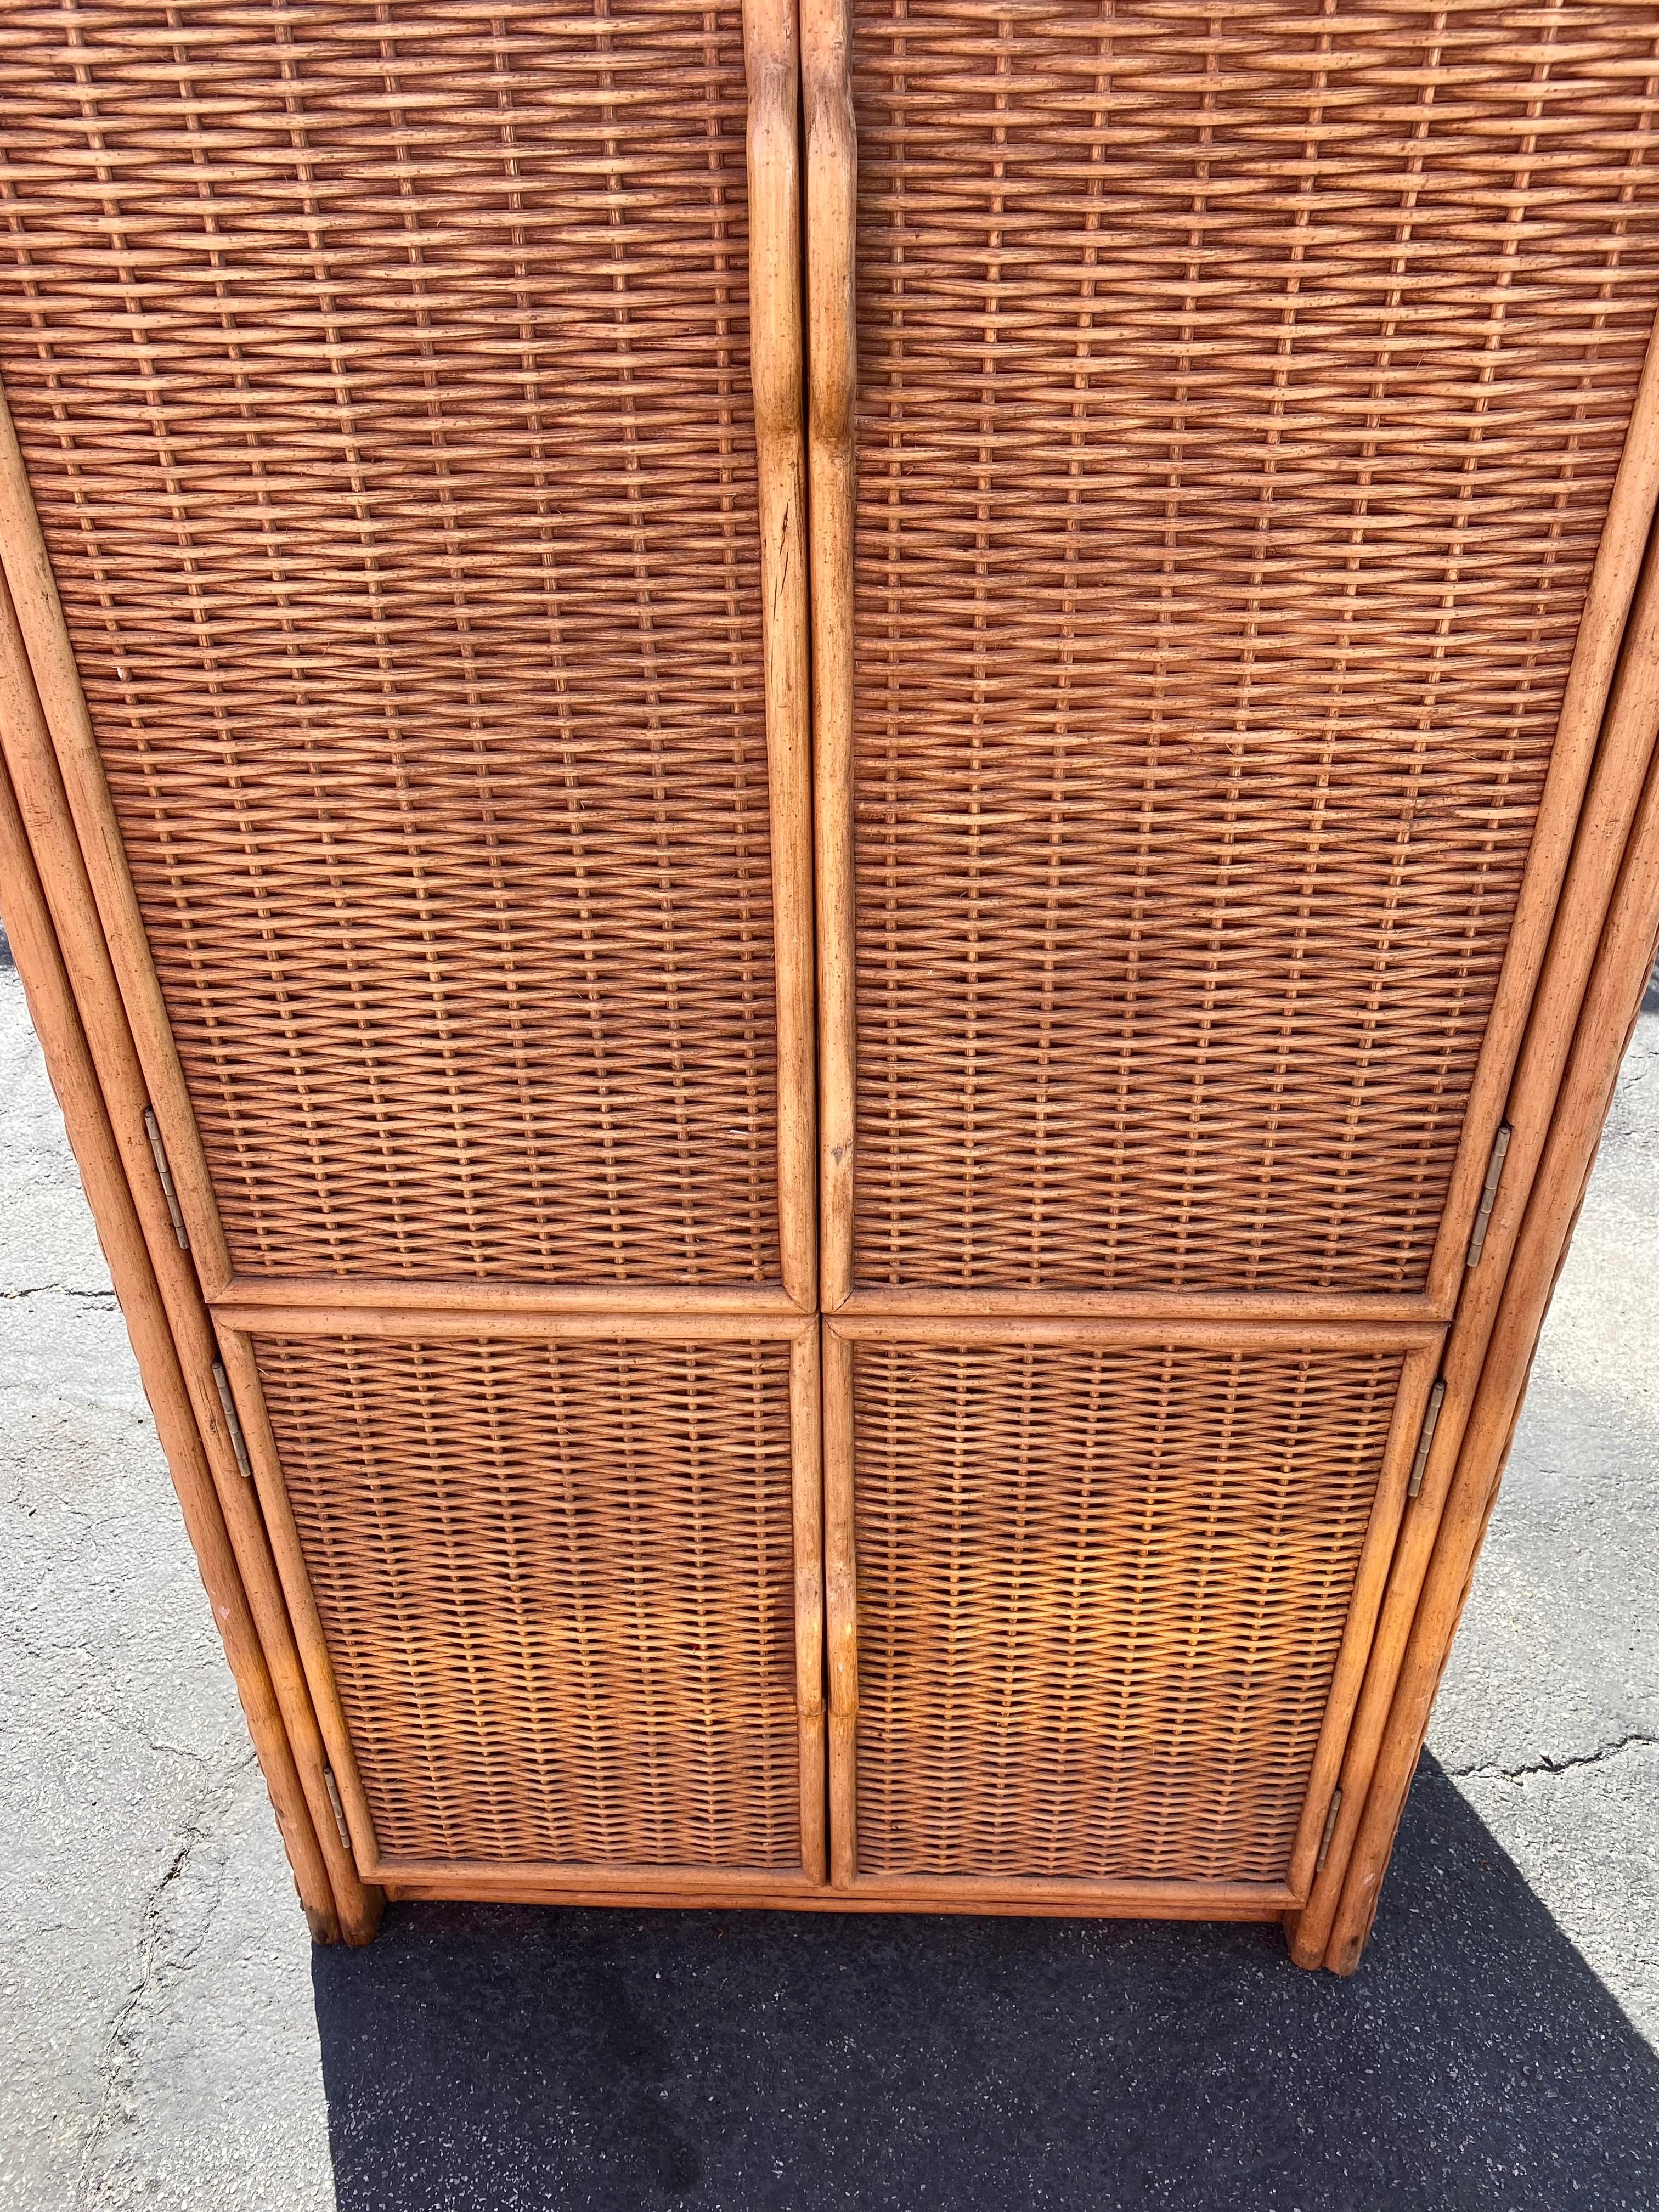 1970s Rattan Curved Top Armoire Wardrobe Storage Cabinet In Good Condition For Sale In Fort Lauderdale, FL